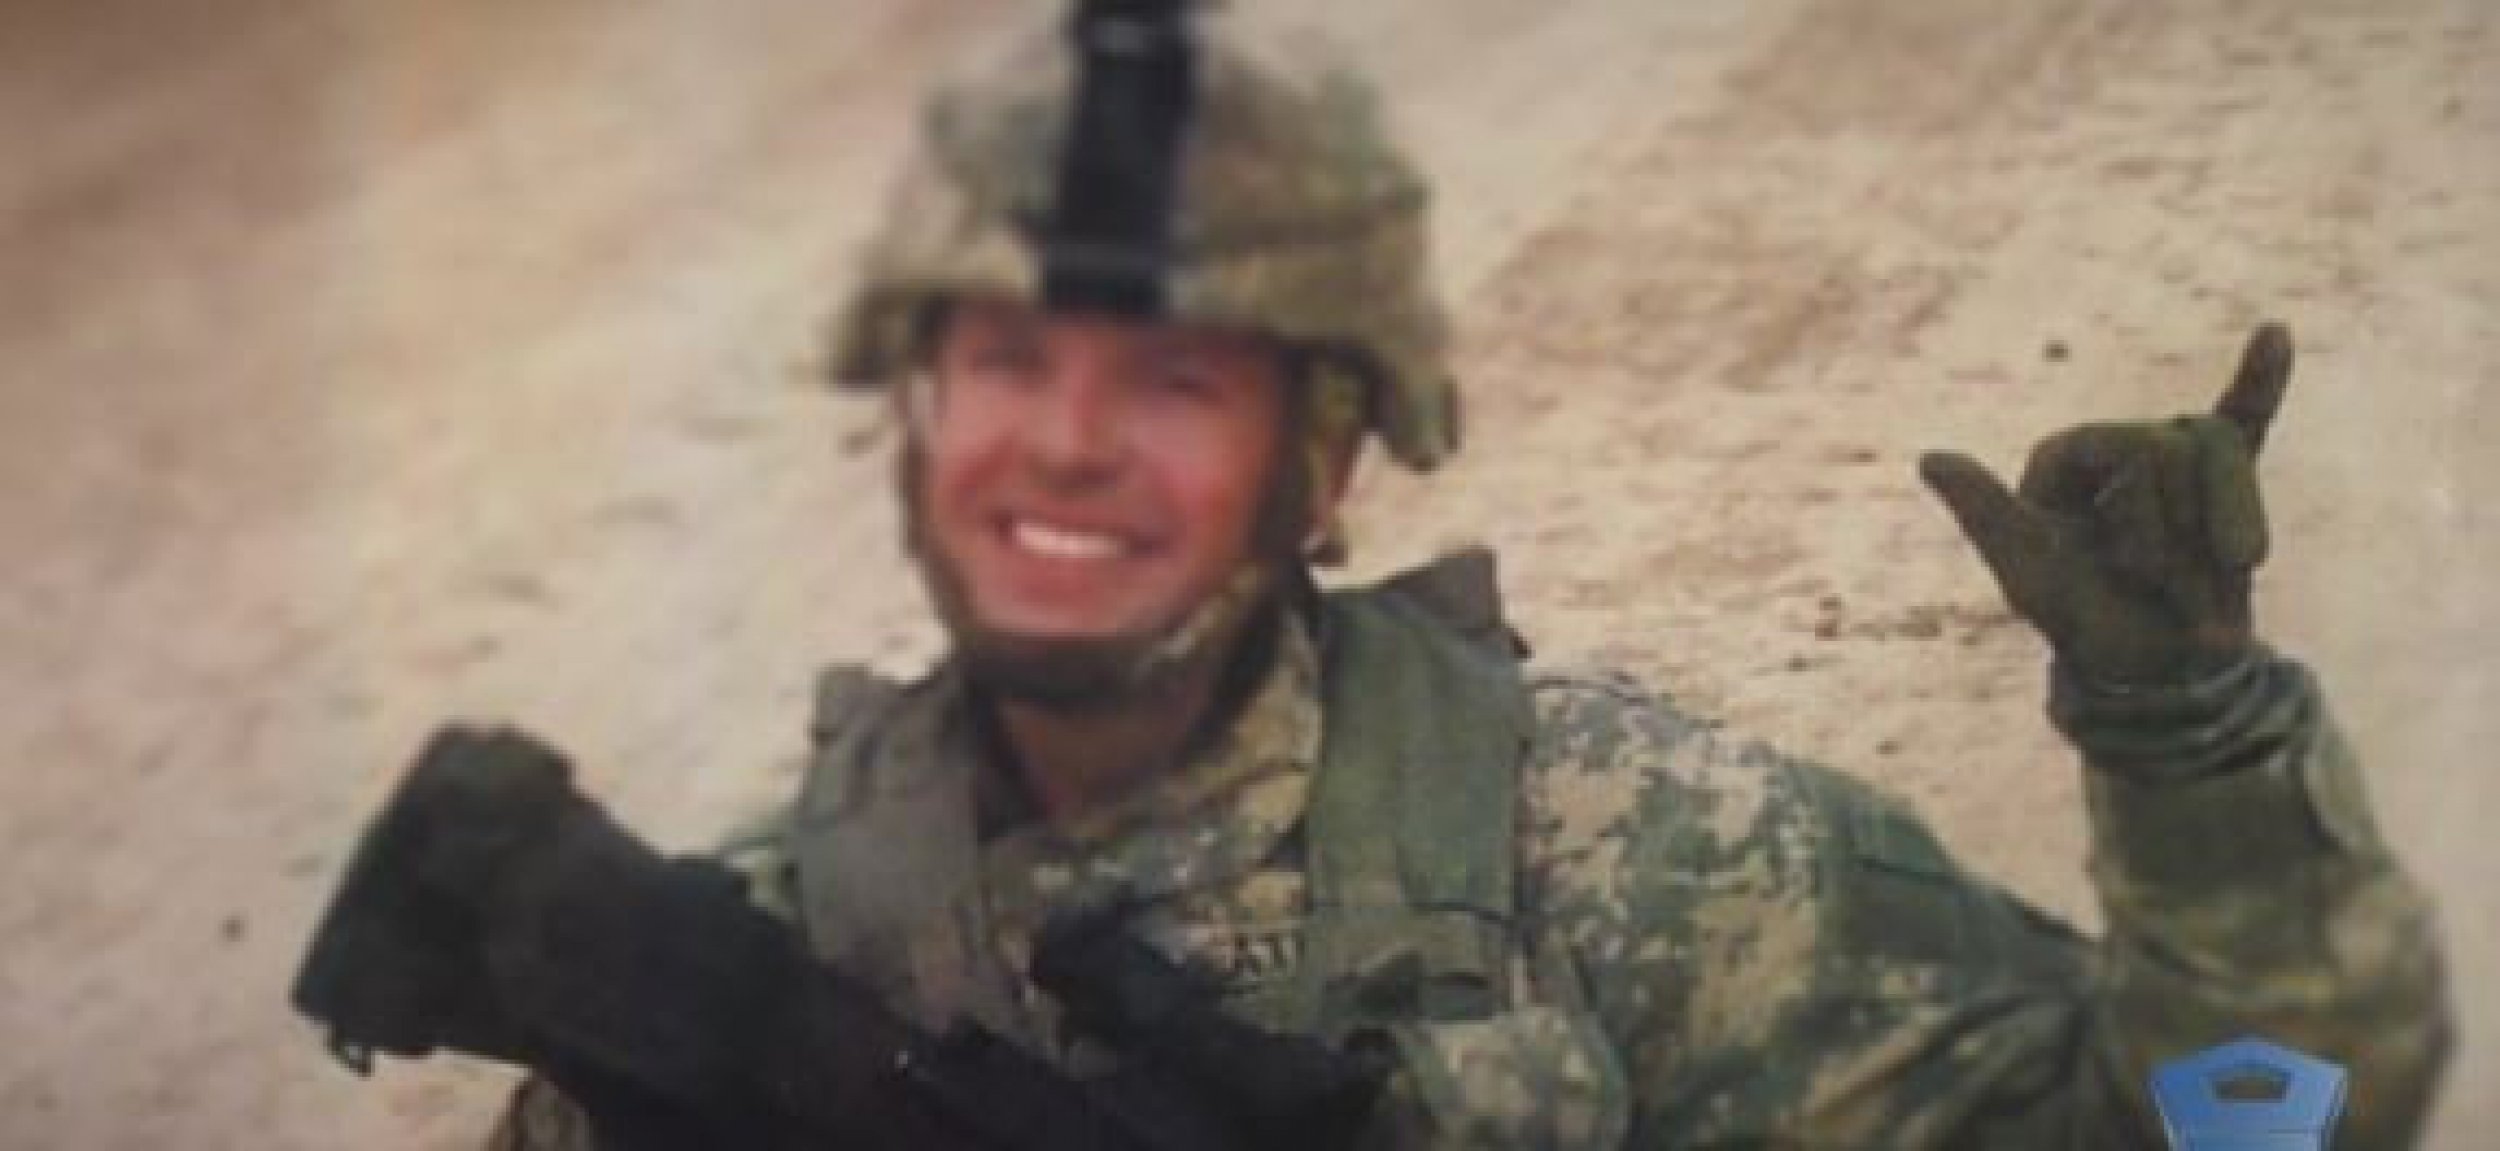 Soldier Receives Posthumous Medal Of Honor After Shielding Others From Suicide Bomber